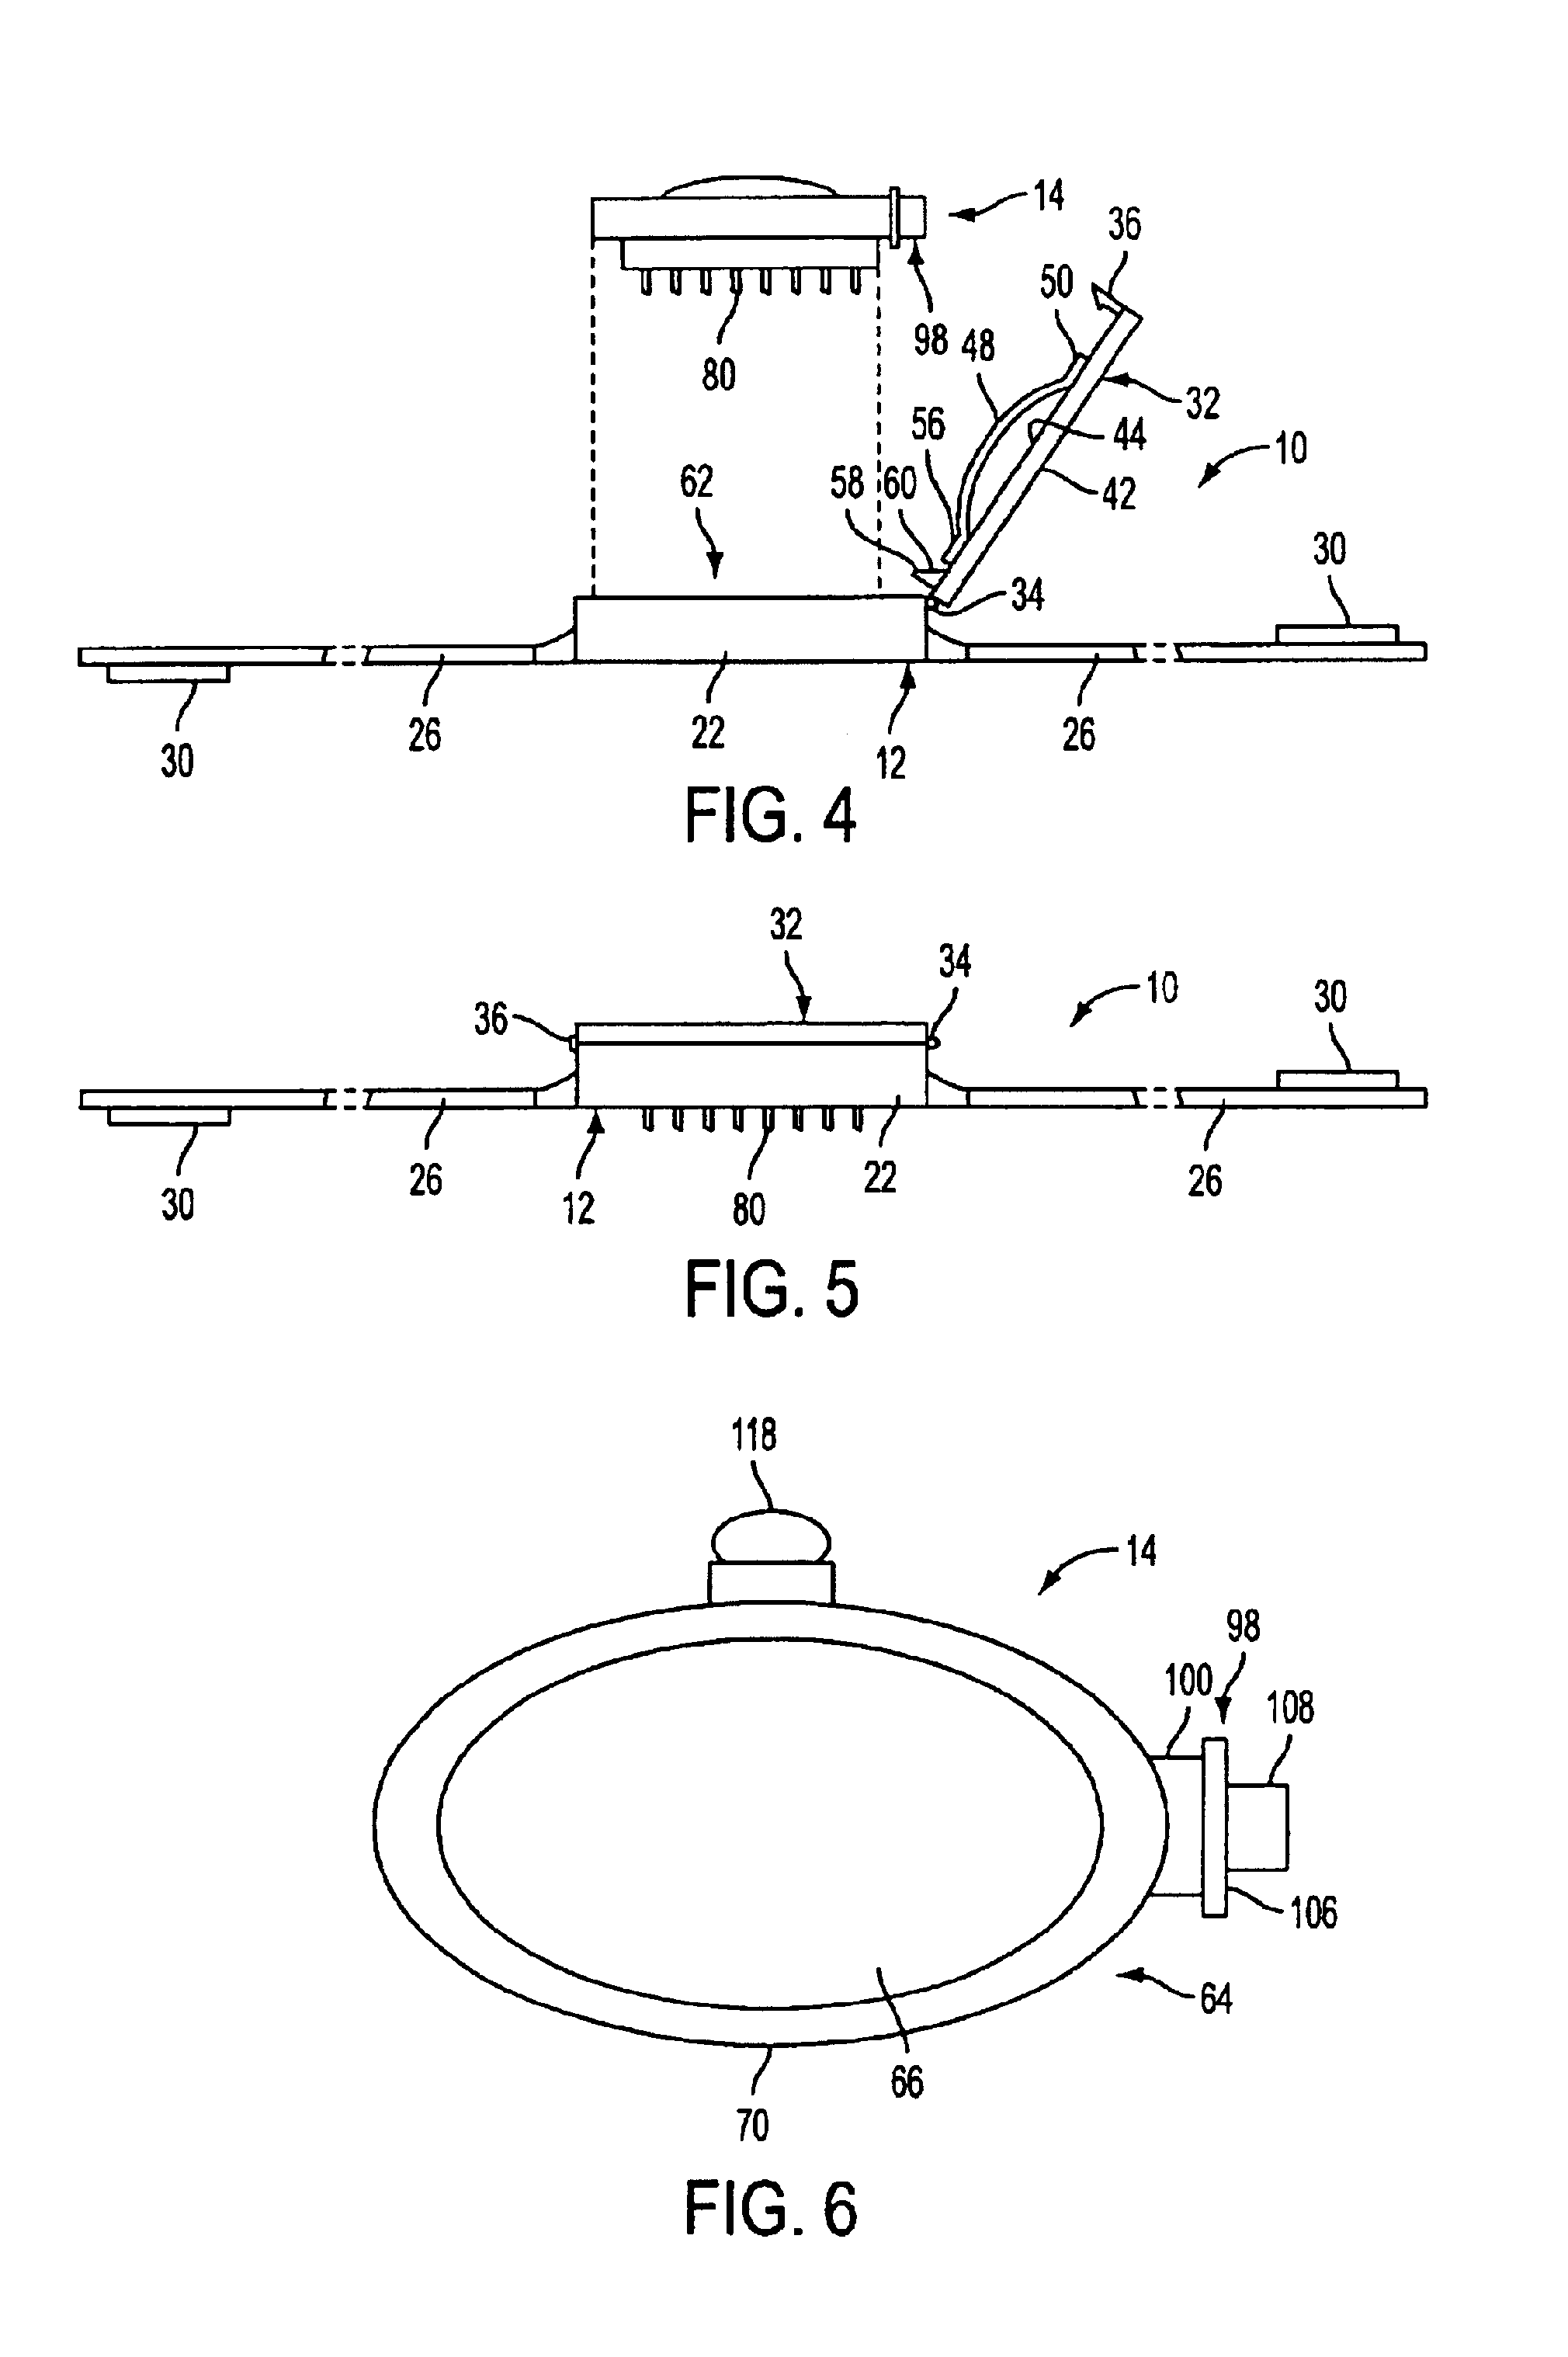 Intradermal delivery device